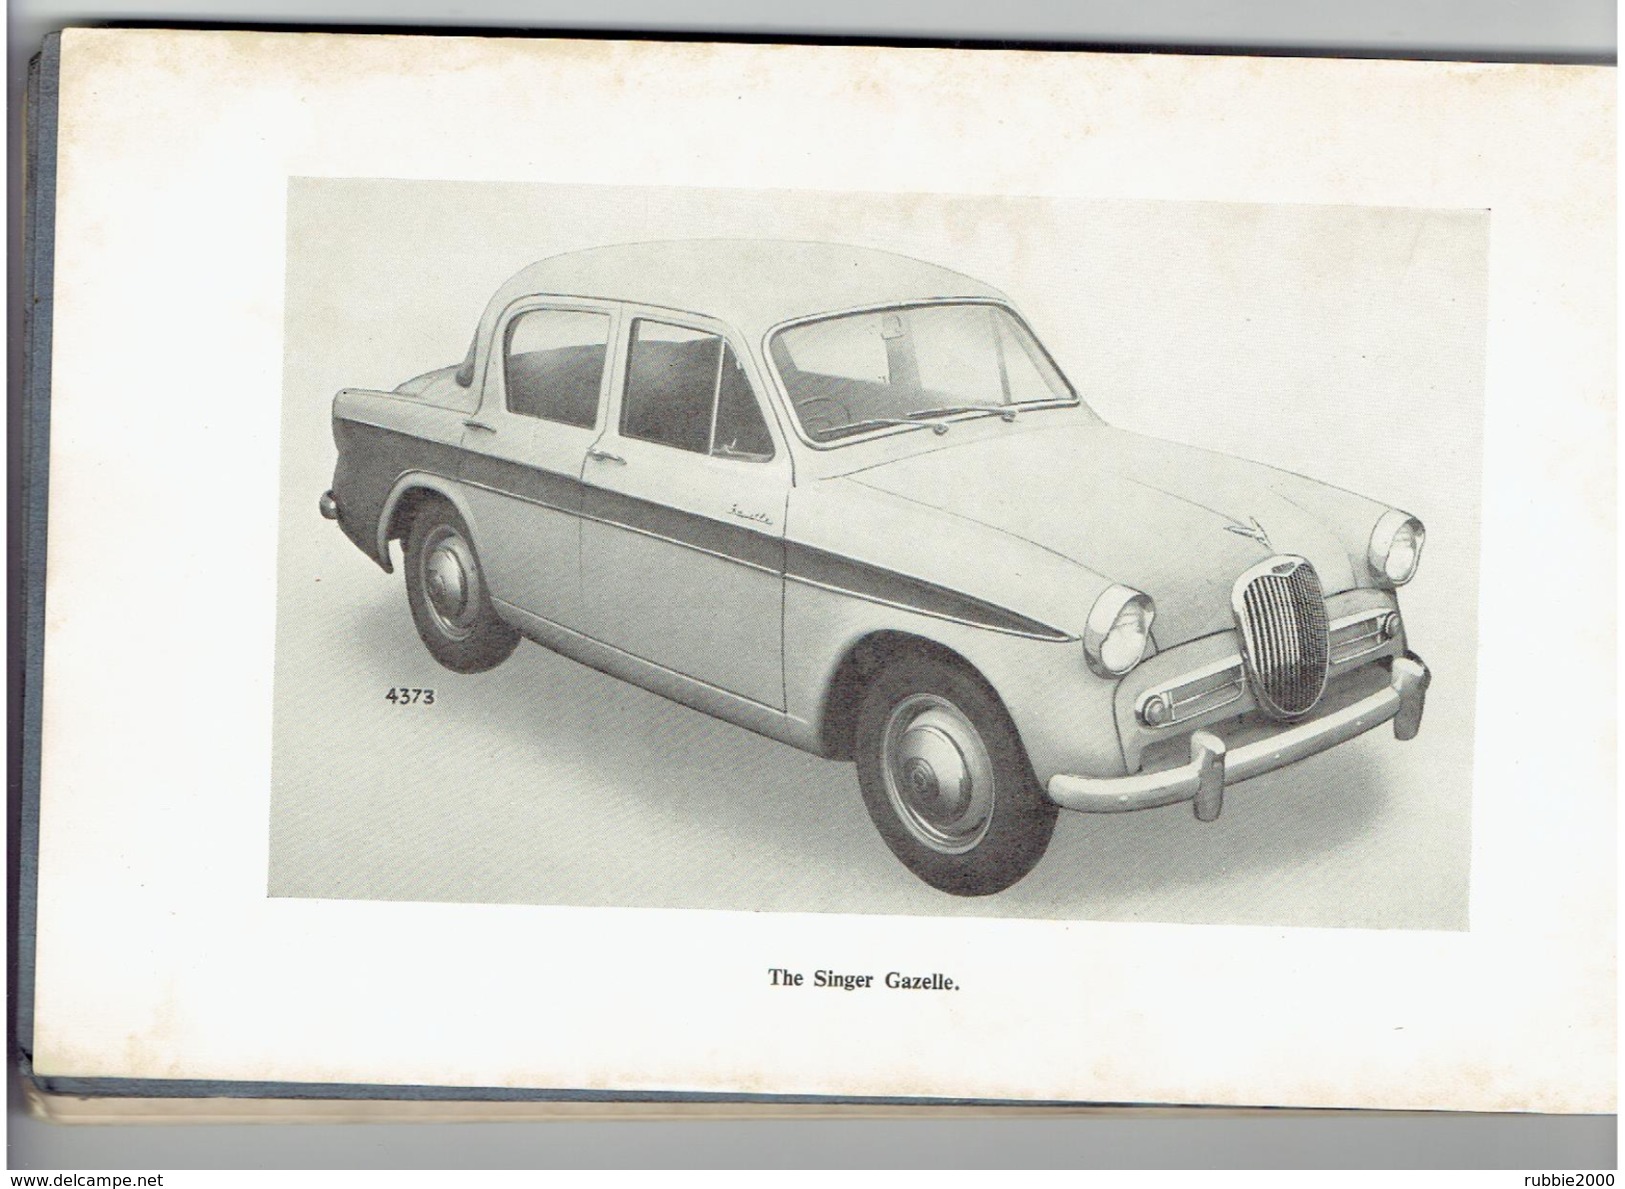 THE SINGER GAZELLE OWNERS HANDBOOK ISSUED 1958 SINGER MOTORS LIMITED COVENTRY ENGLAND A ROOTES PRODUCT - Transportes